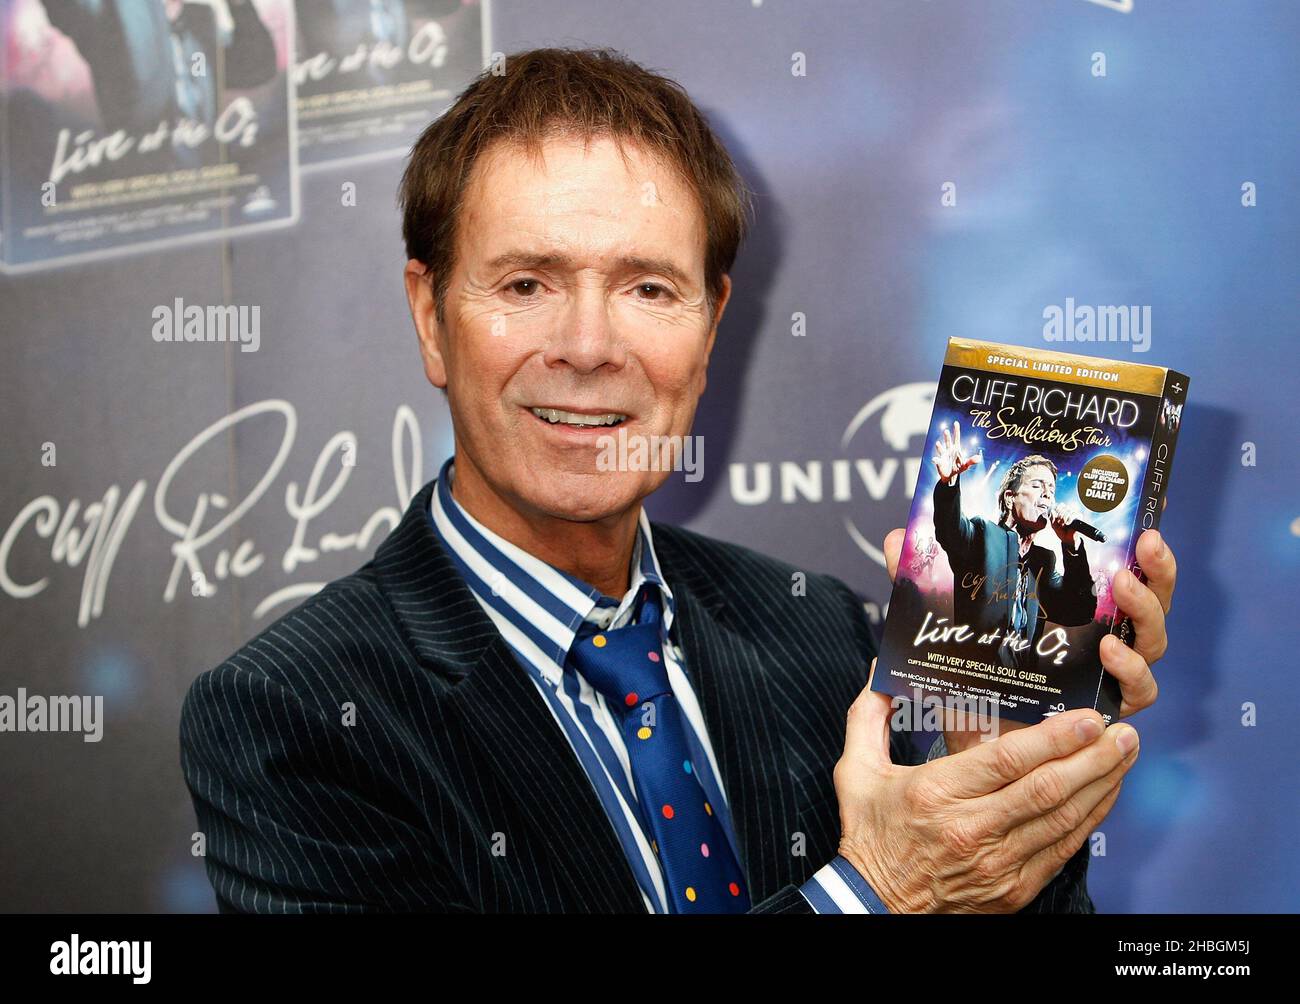 Cliff richard hi-res stock photography and images - Alamy